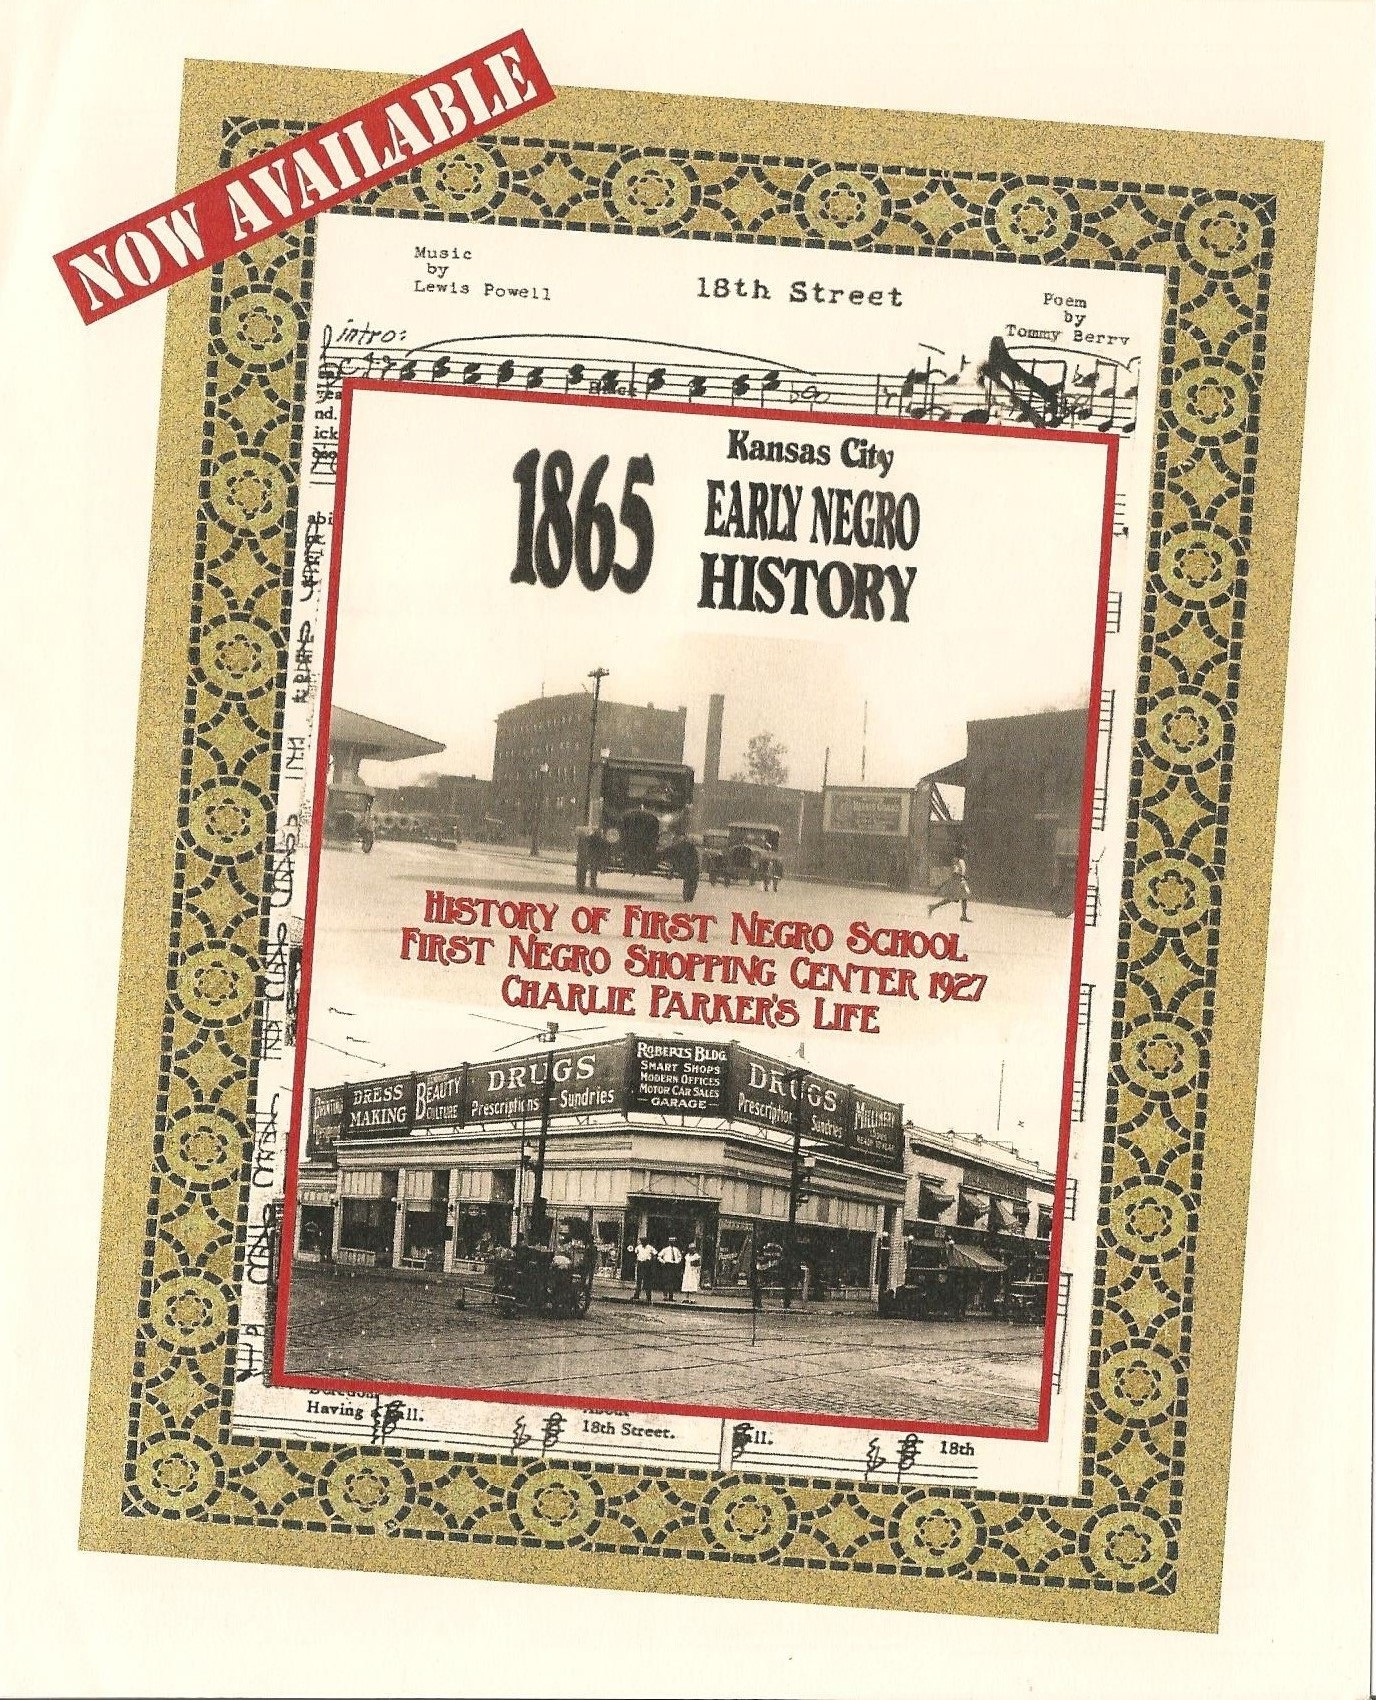 CMG July Book #1 of The Month is 1865 Kansas City Early Negro History